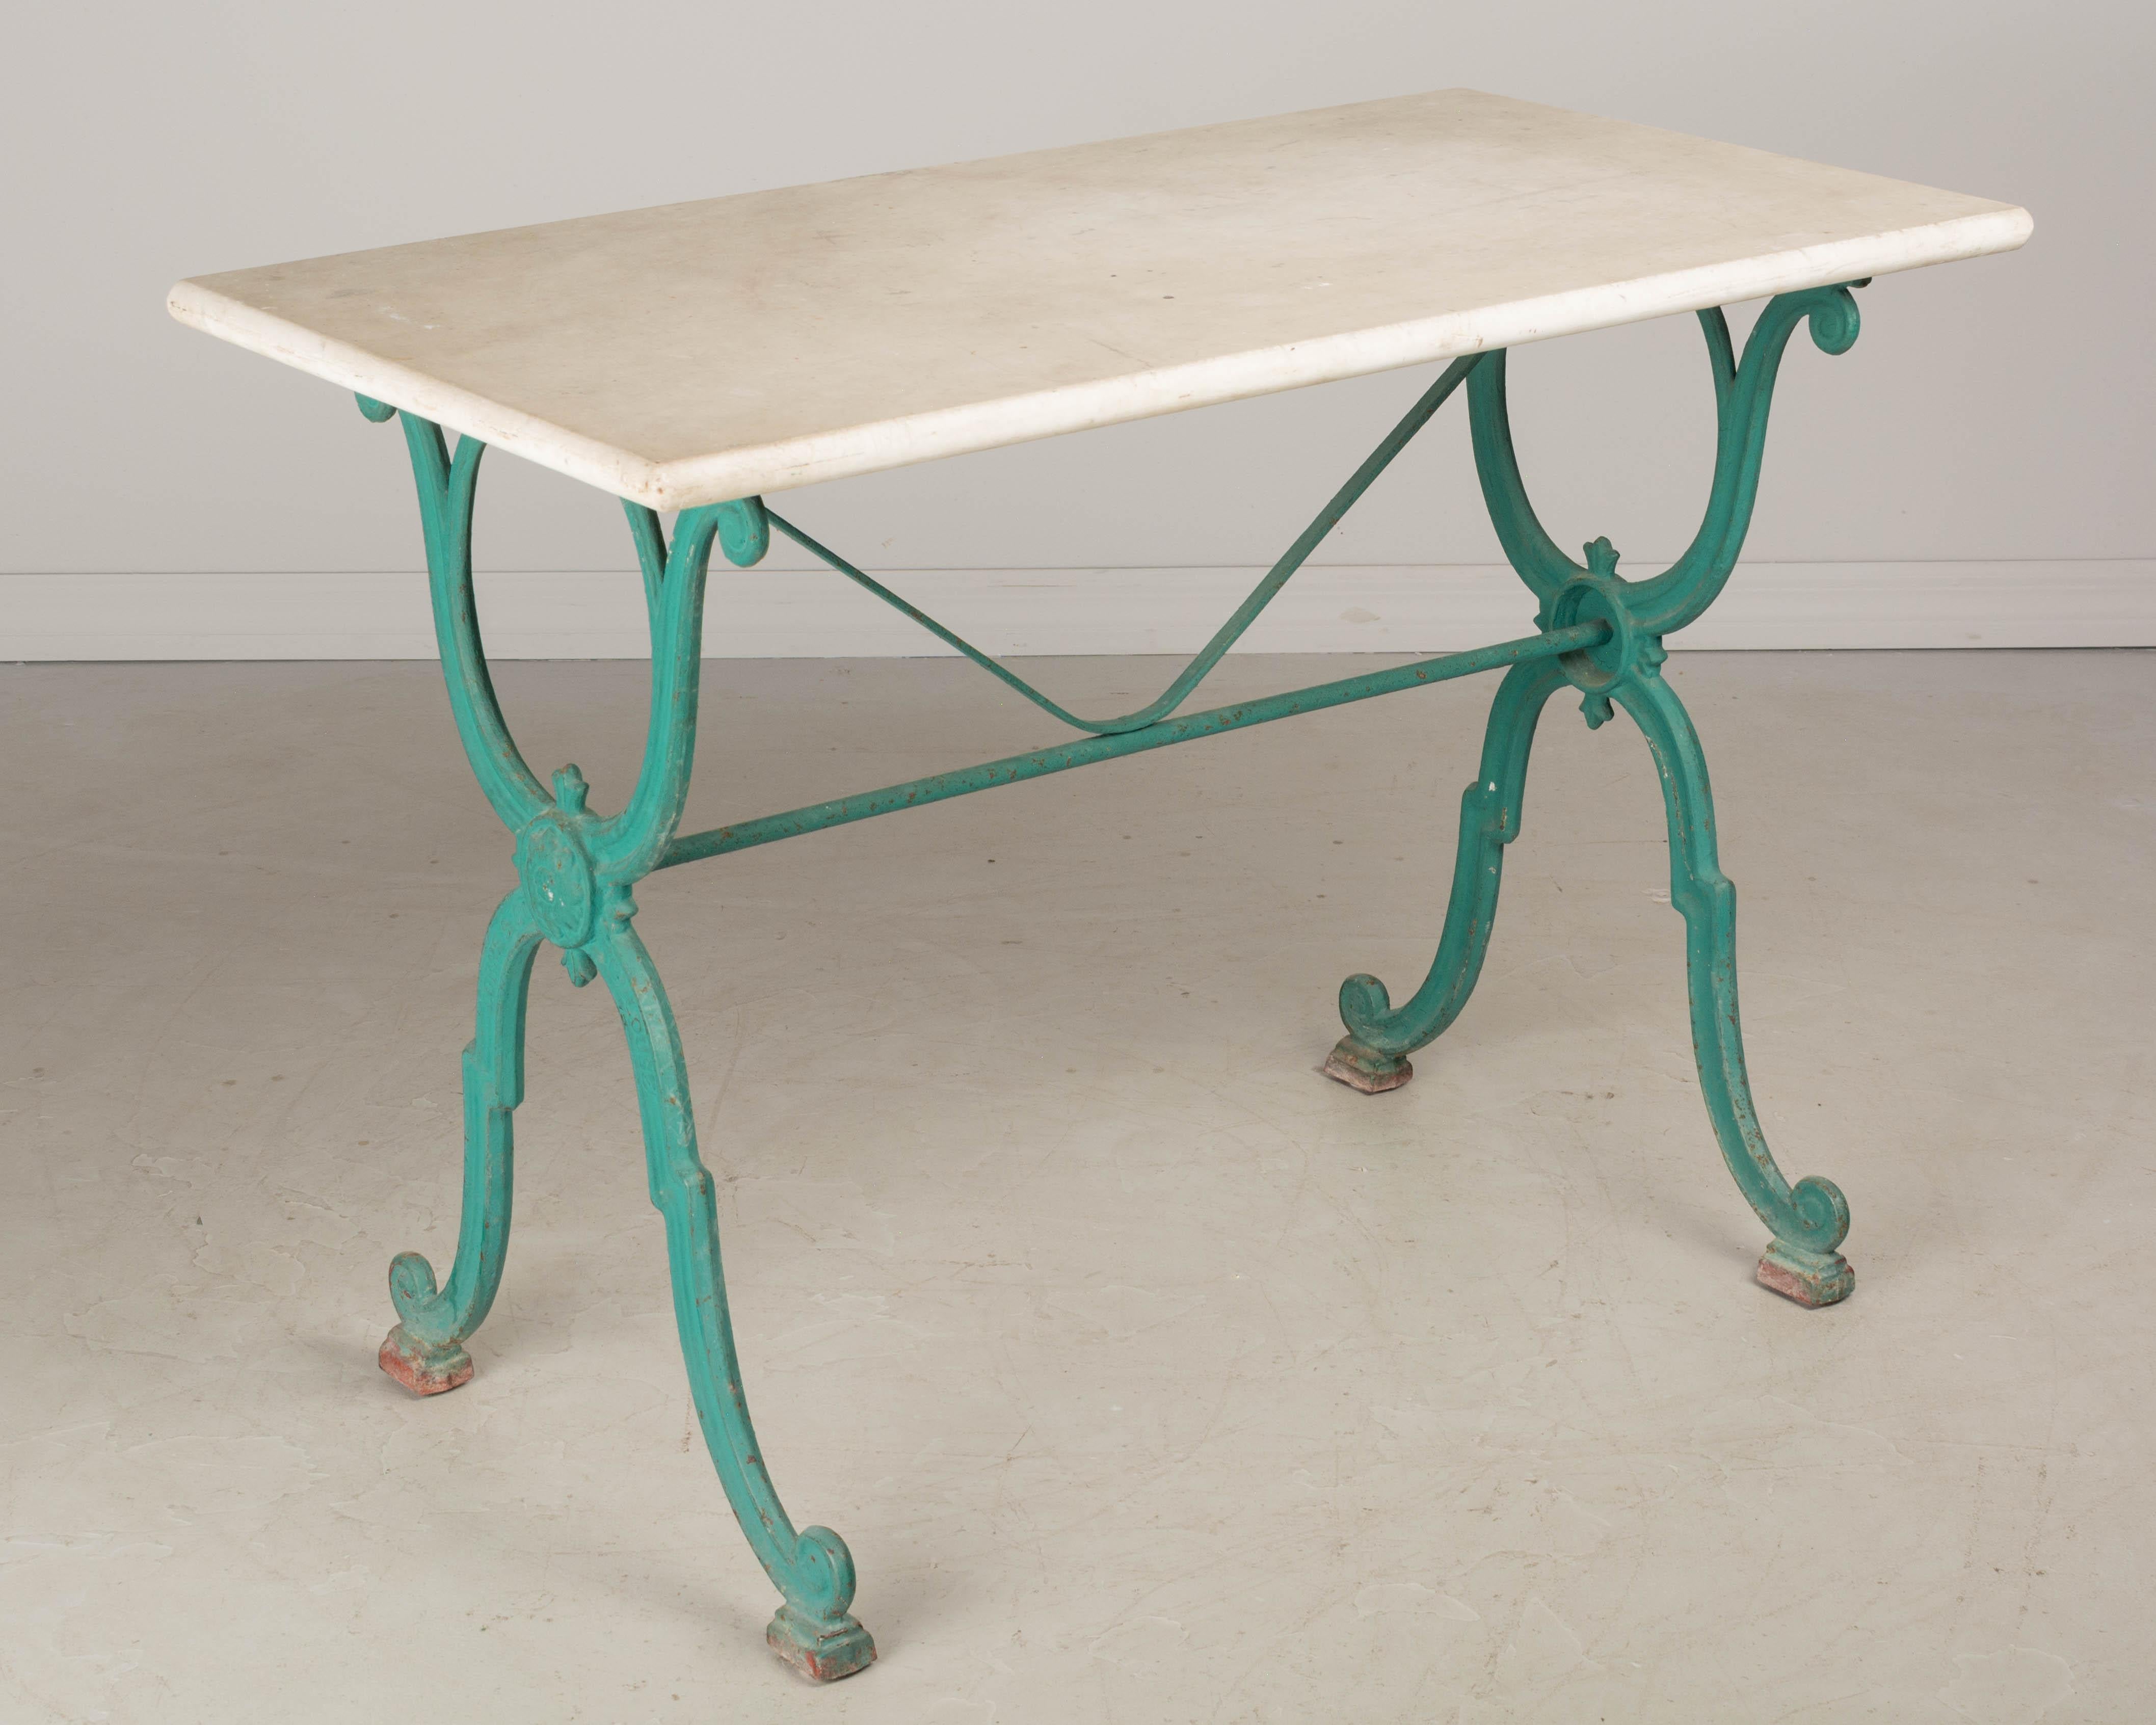 A 19th century French cast iron, marble top bistro table, or garden table, with marble top. The turquoise painted iron base is stamped with the foundry: Corné & Cie. Toulouse. Good quality, heavy casting with minor paint loss and rusting at feet.